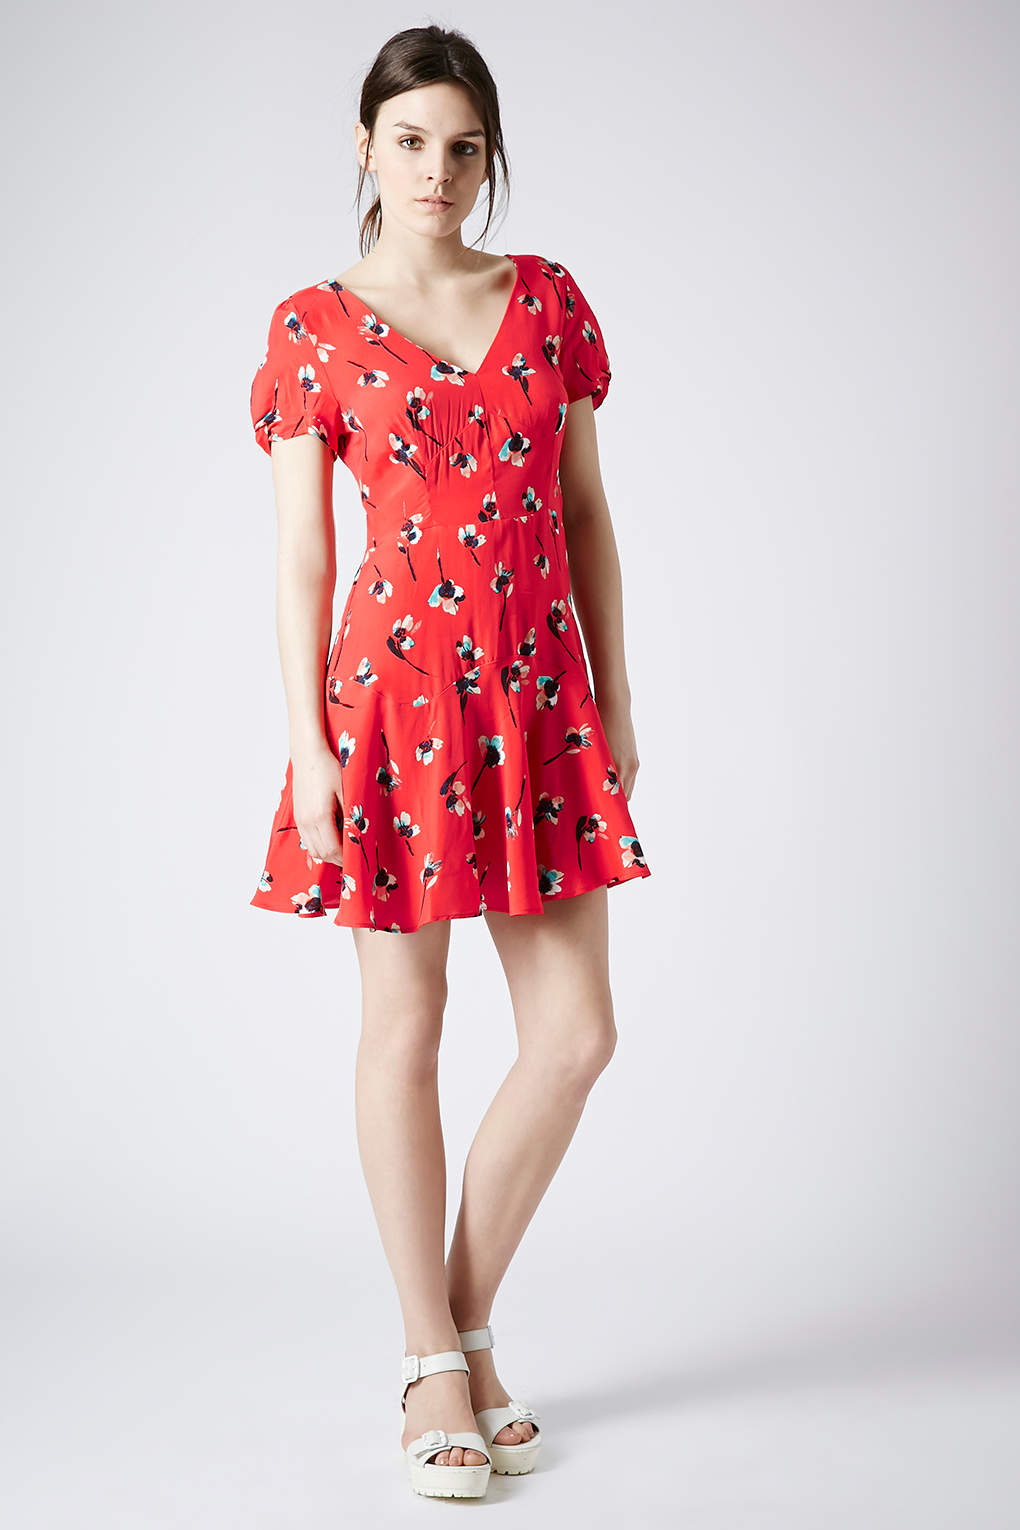 Topshop NEW Painted Floral Red Tea Dress RRP £45 Size 6 to 16 | eBay